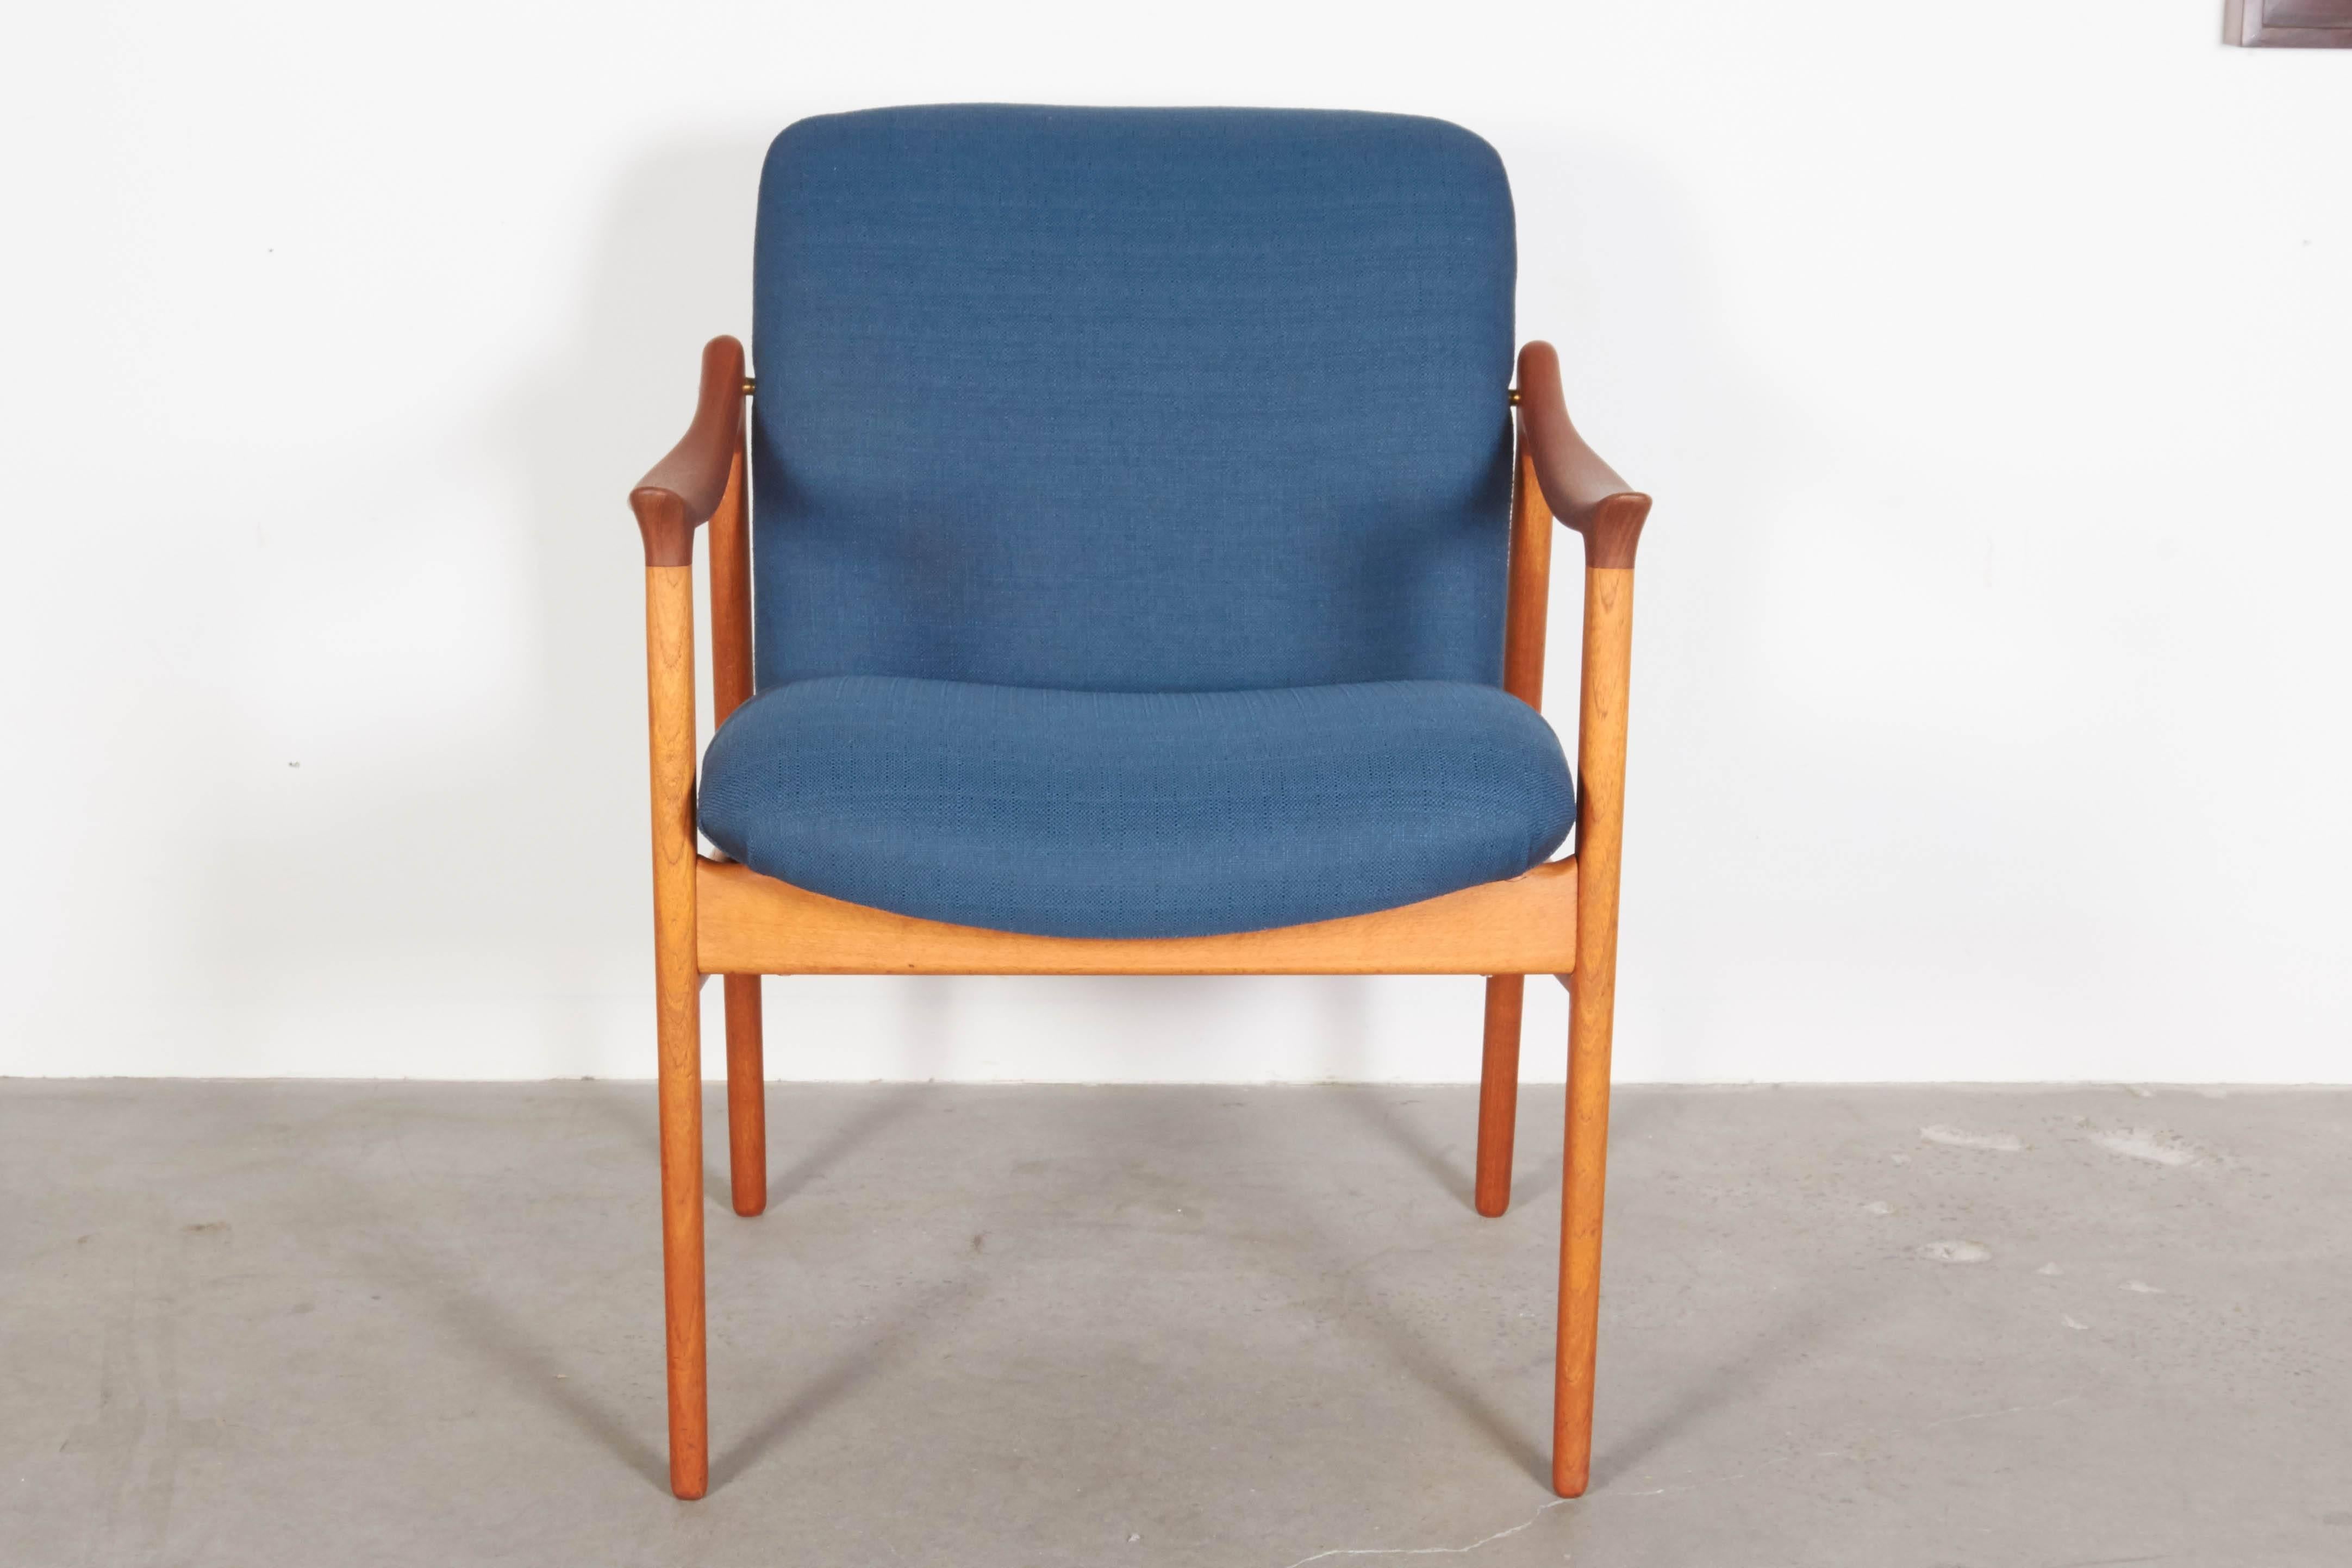 Vintage 1950s Norwegian Teak Armchair by Rastad & Relling

This mid century arm chair is in excellent condition. Newly upholstered or we can re-upholster it for you in what ever fabric you like for an extra cost. Ready for pick up, delivery, or